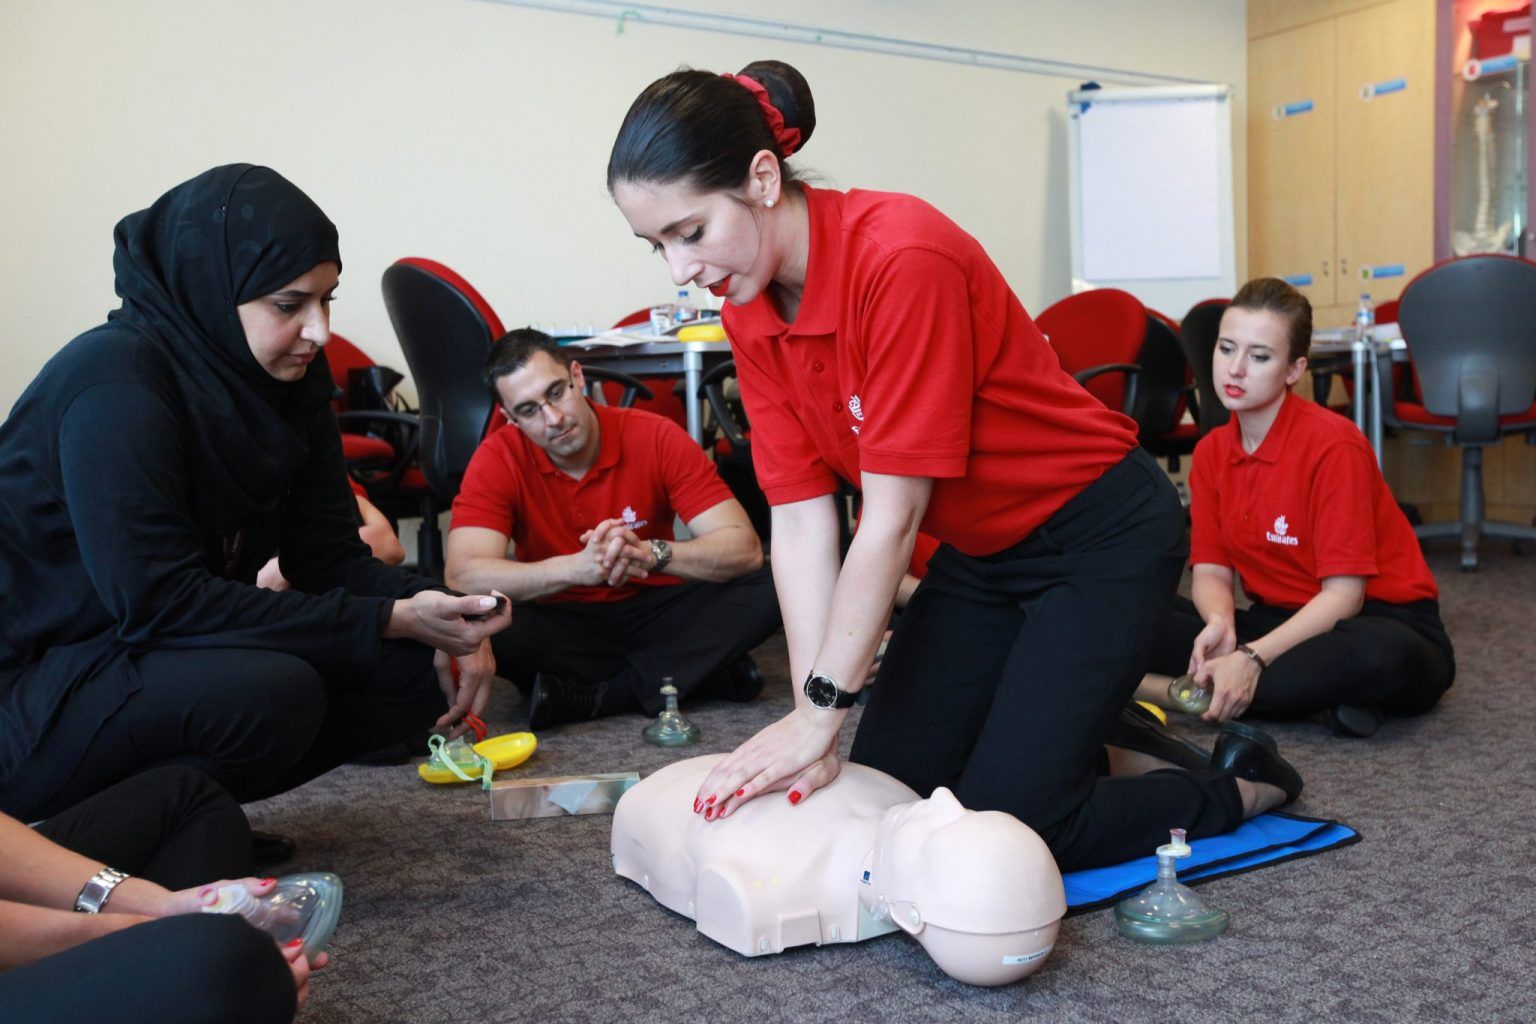 Emirates' cabin crew undergo extensive medical and safety training at the Dubai center